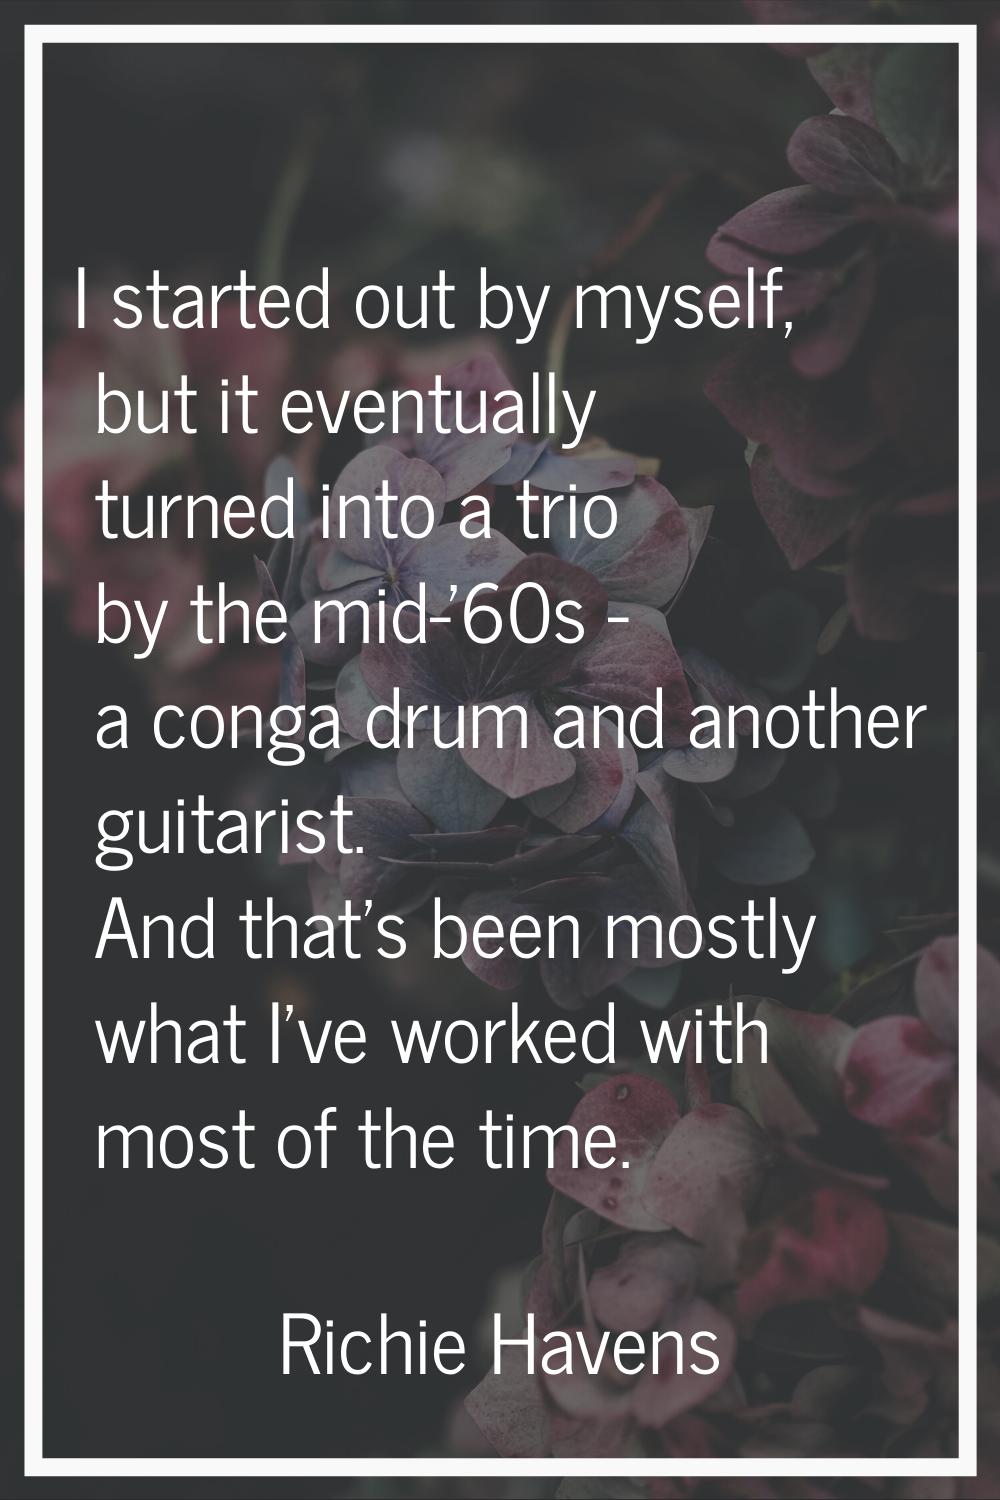 I started out by myself, but it eventually turned into a trio by the mid-'60s - a conga drum and an